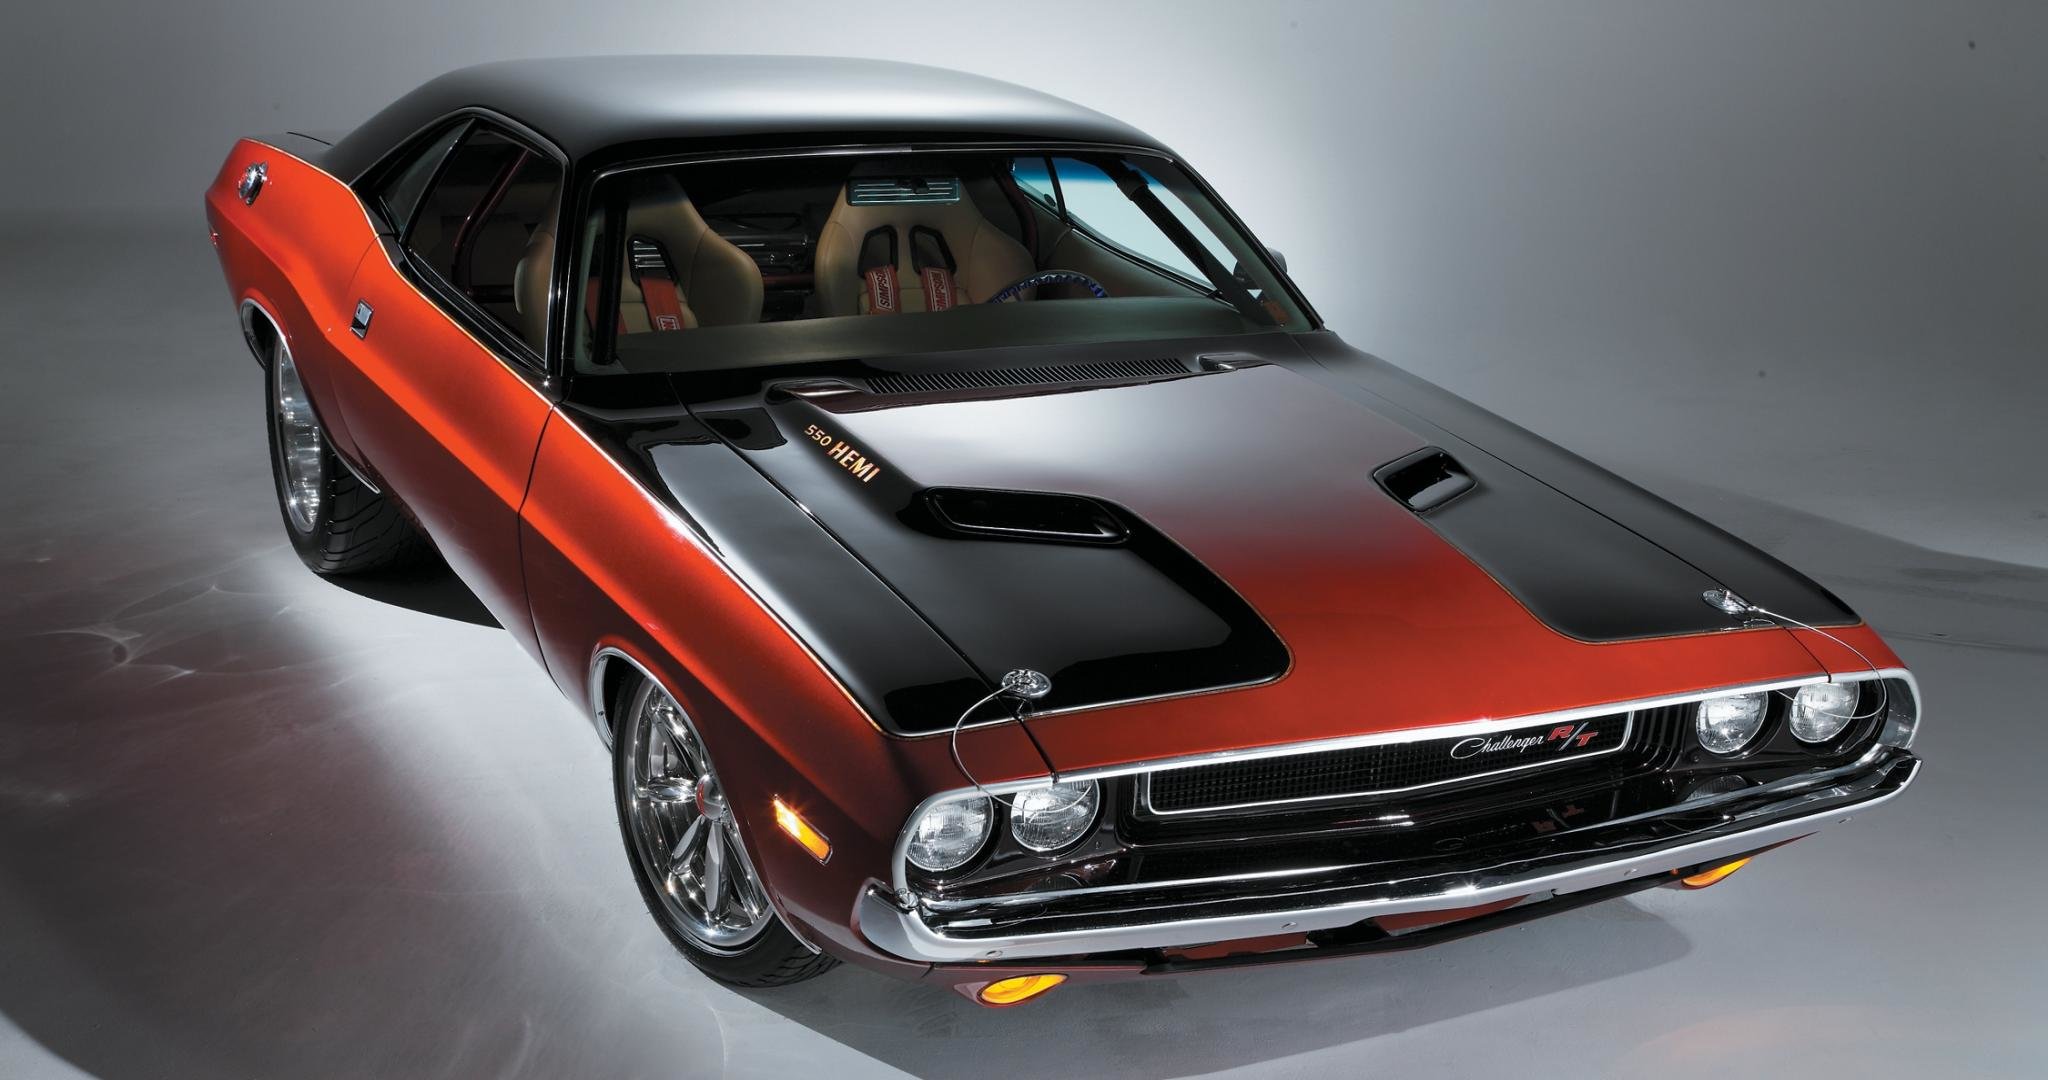 Awesome Dodge free wallpaper ID:290559 for hd 2048x1080 desktop